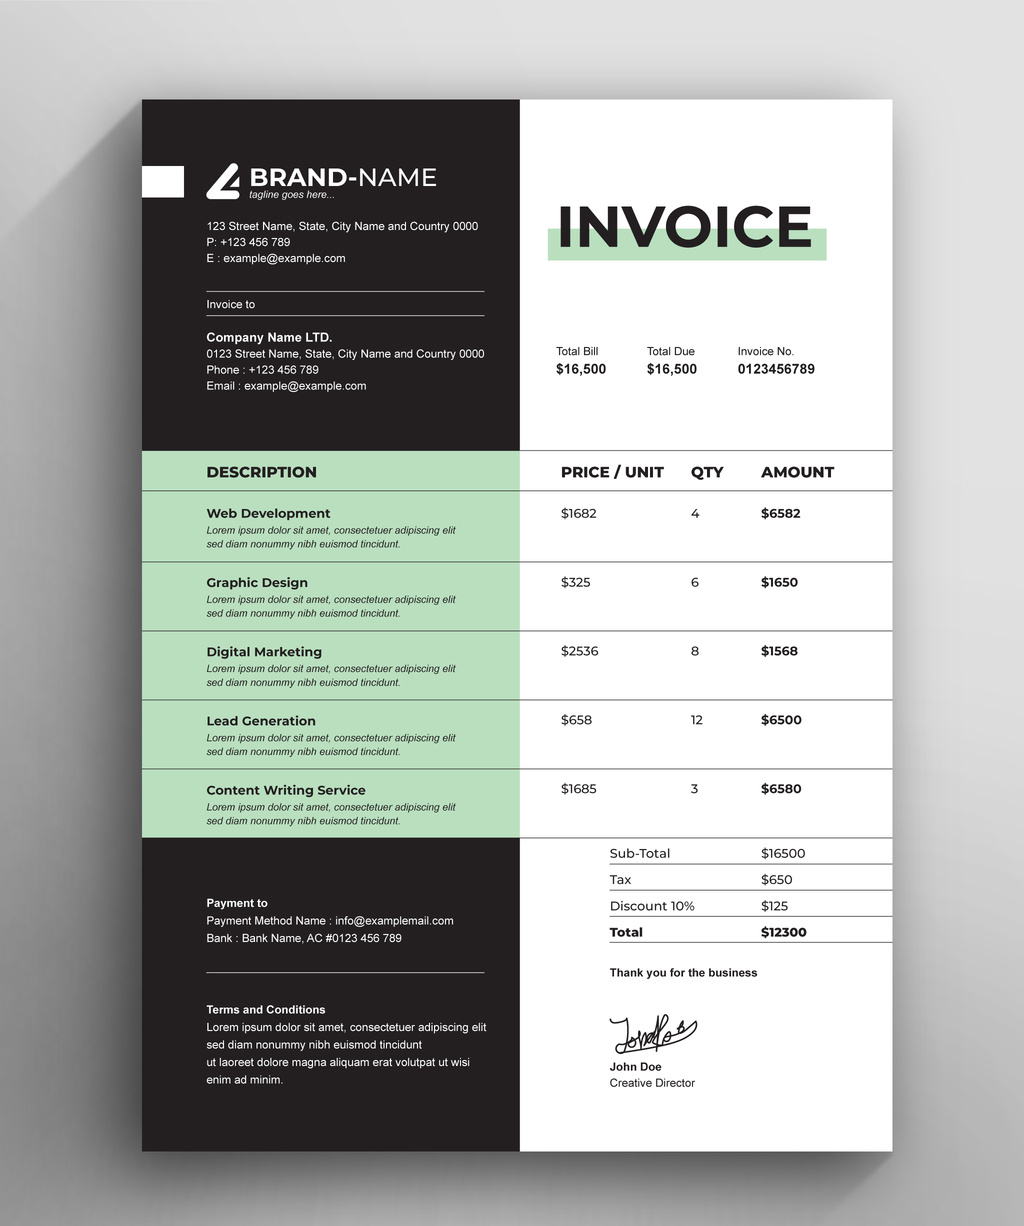 New Clean Invoice Layout (AI Format)